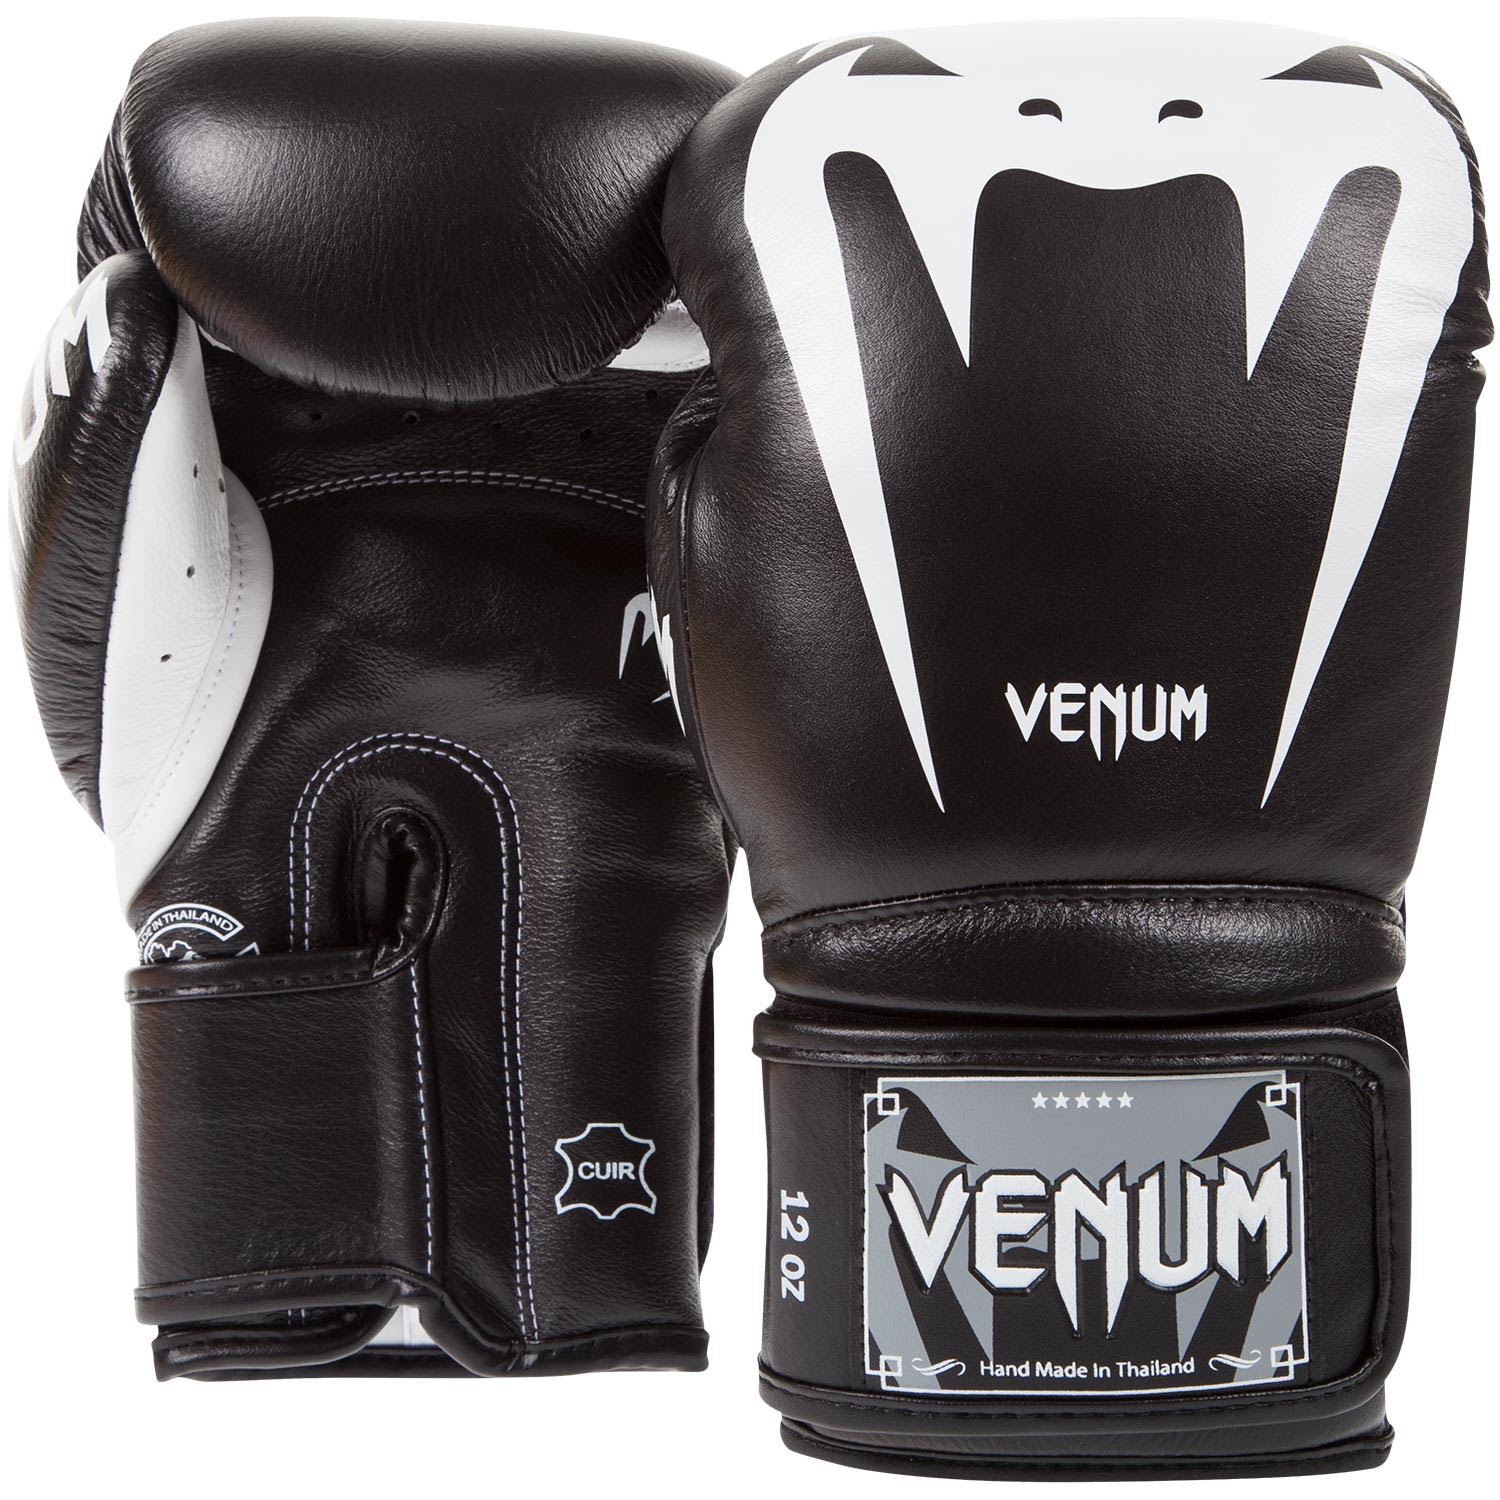 Venum Giant 3.0 Nappa Leather Hook and Loop Boxing Gloves - 12 oz. - Black/White - image 5 of 5